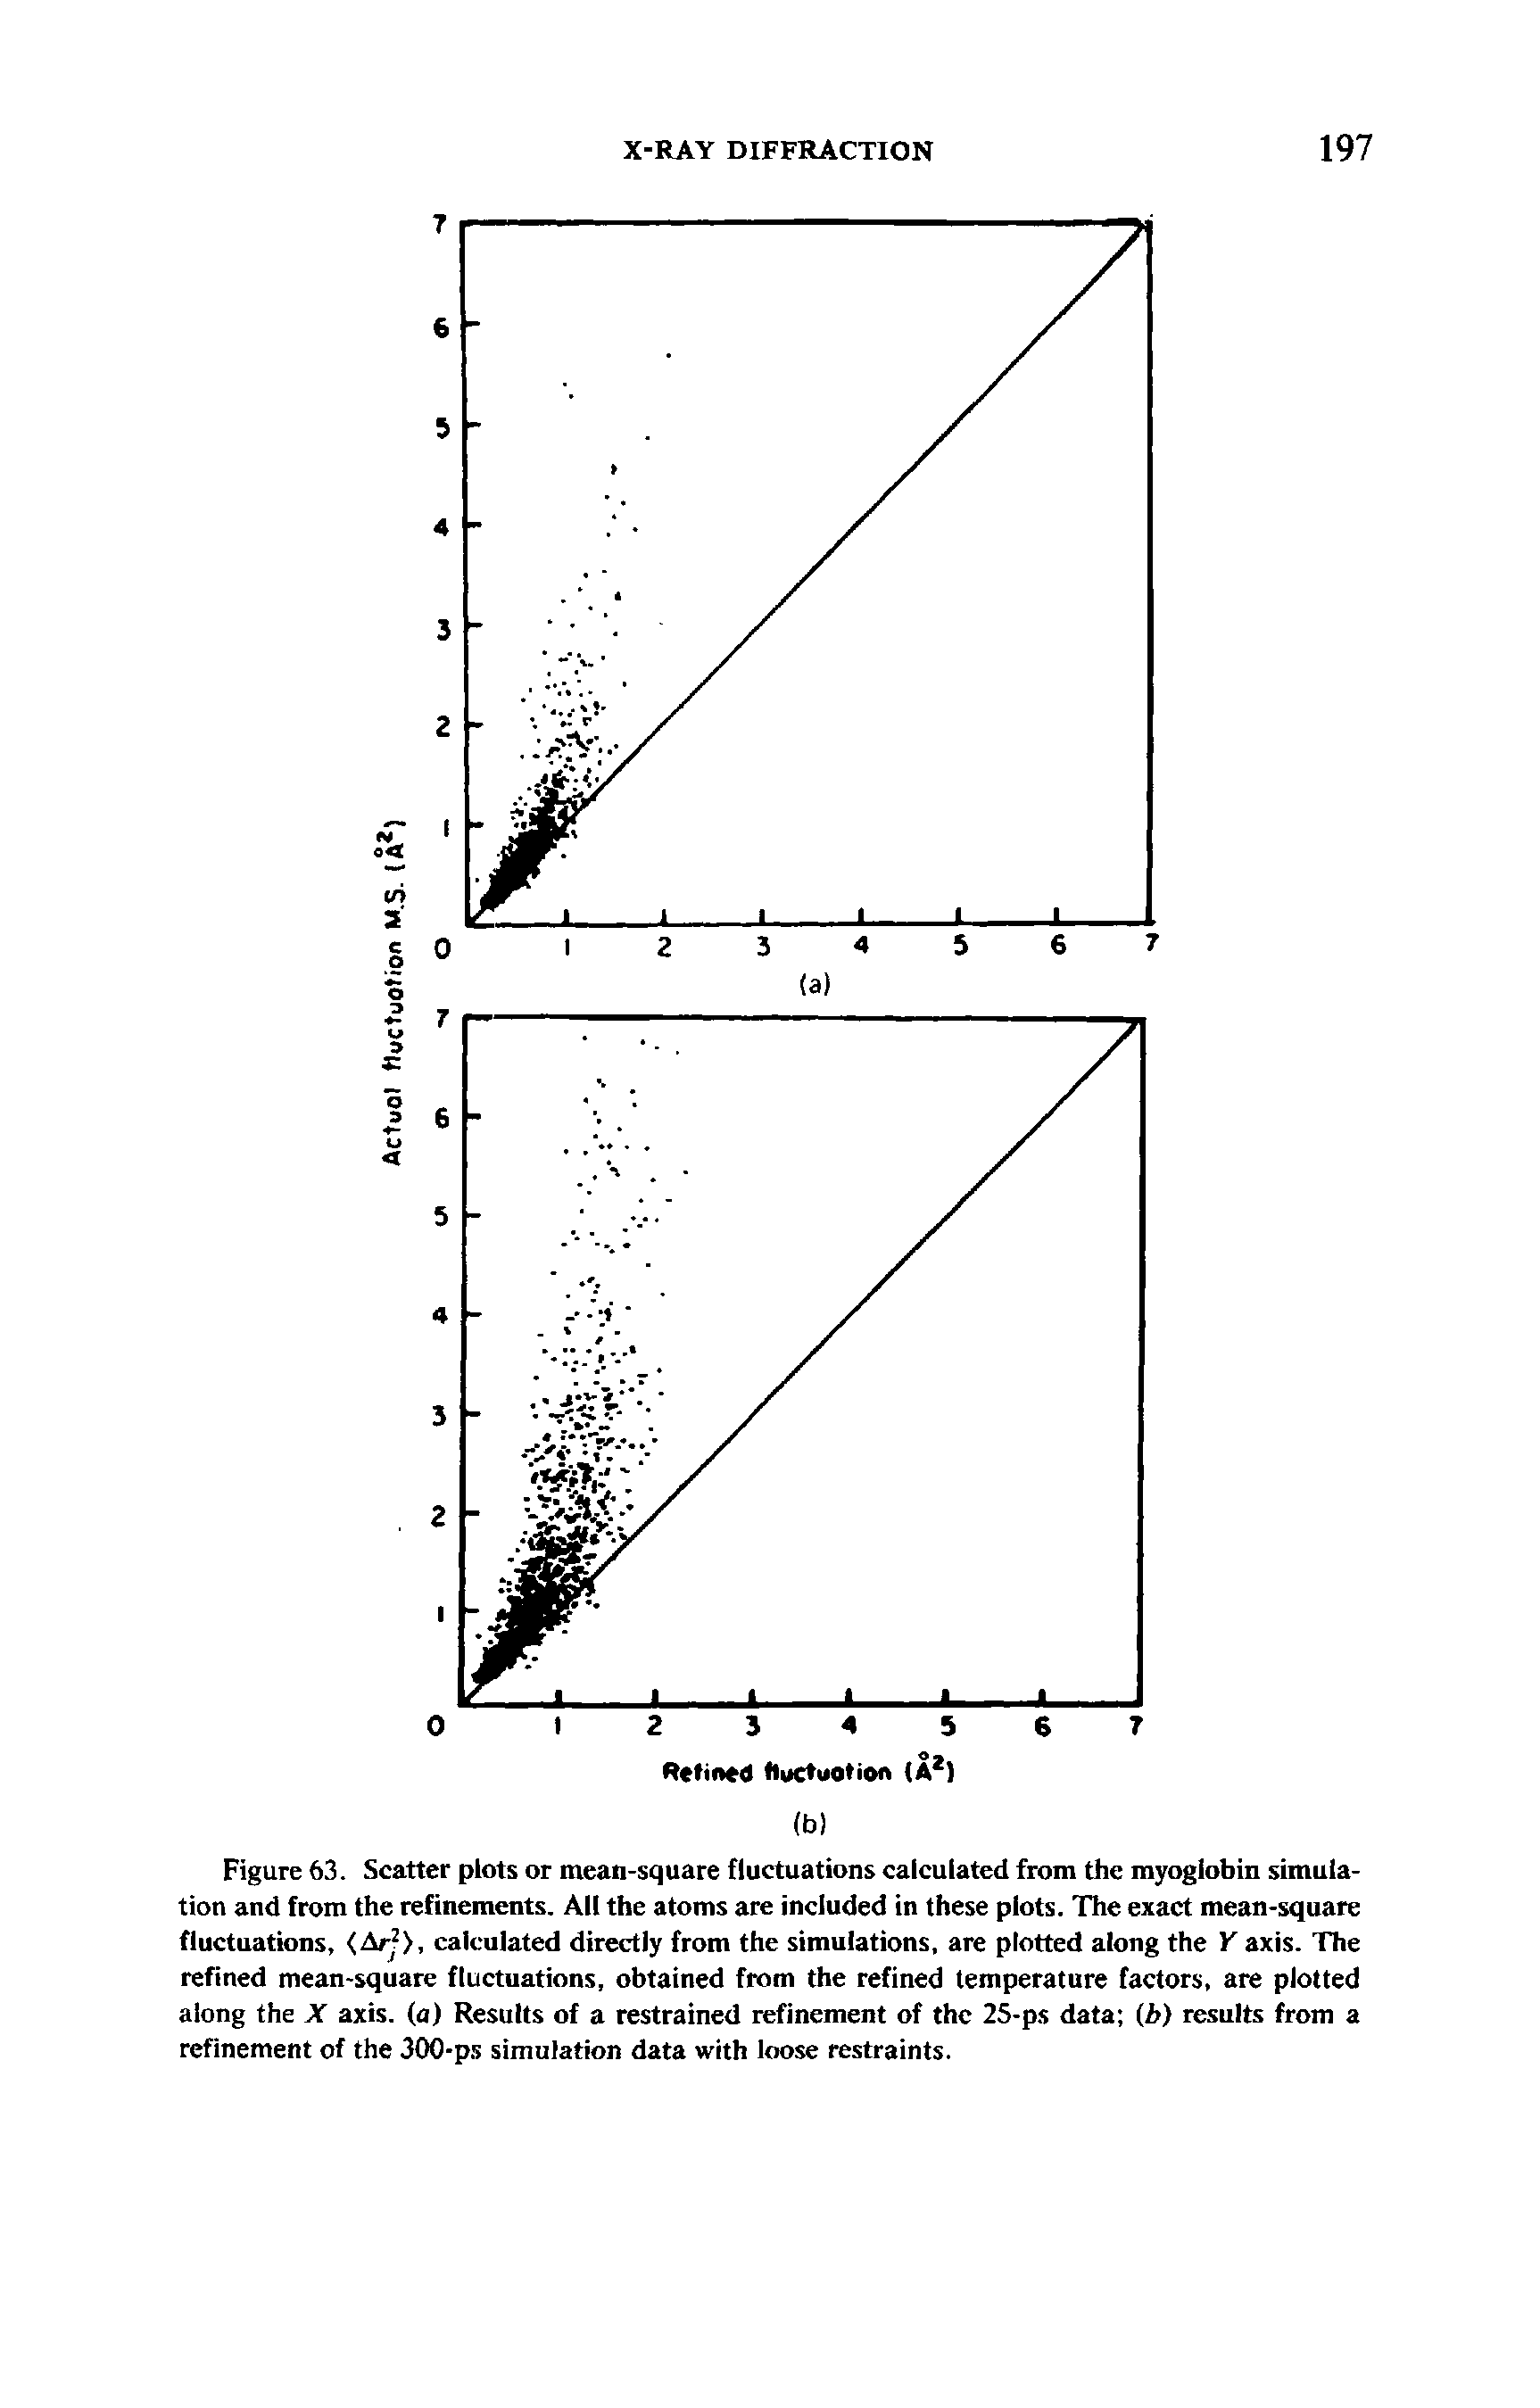 Figure 63. Scatter plots or mean-square fluctuations calculated from the myoglobin simulation and from the refinements. All the atoms are included in these plots. The exact mean-square fluctuations, <Ar >, calculated directly from the simulations, are plotted along the Y axis. The refined mean-square fluctuations, obtained from the refined temperature factors, are plotted along the X axis, (a) Results of a restrained refinement of the 25-ps data (b) results from a refinement of the 300-ps simulation data with loose restraints.